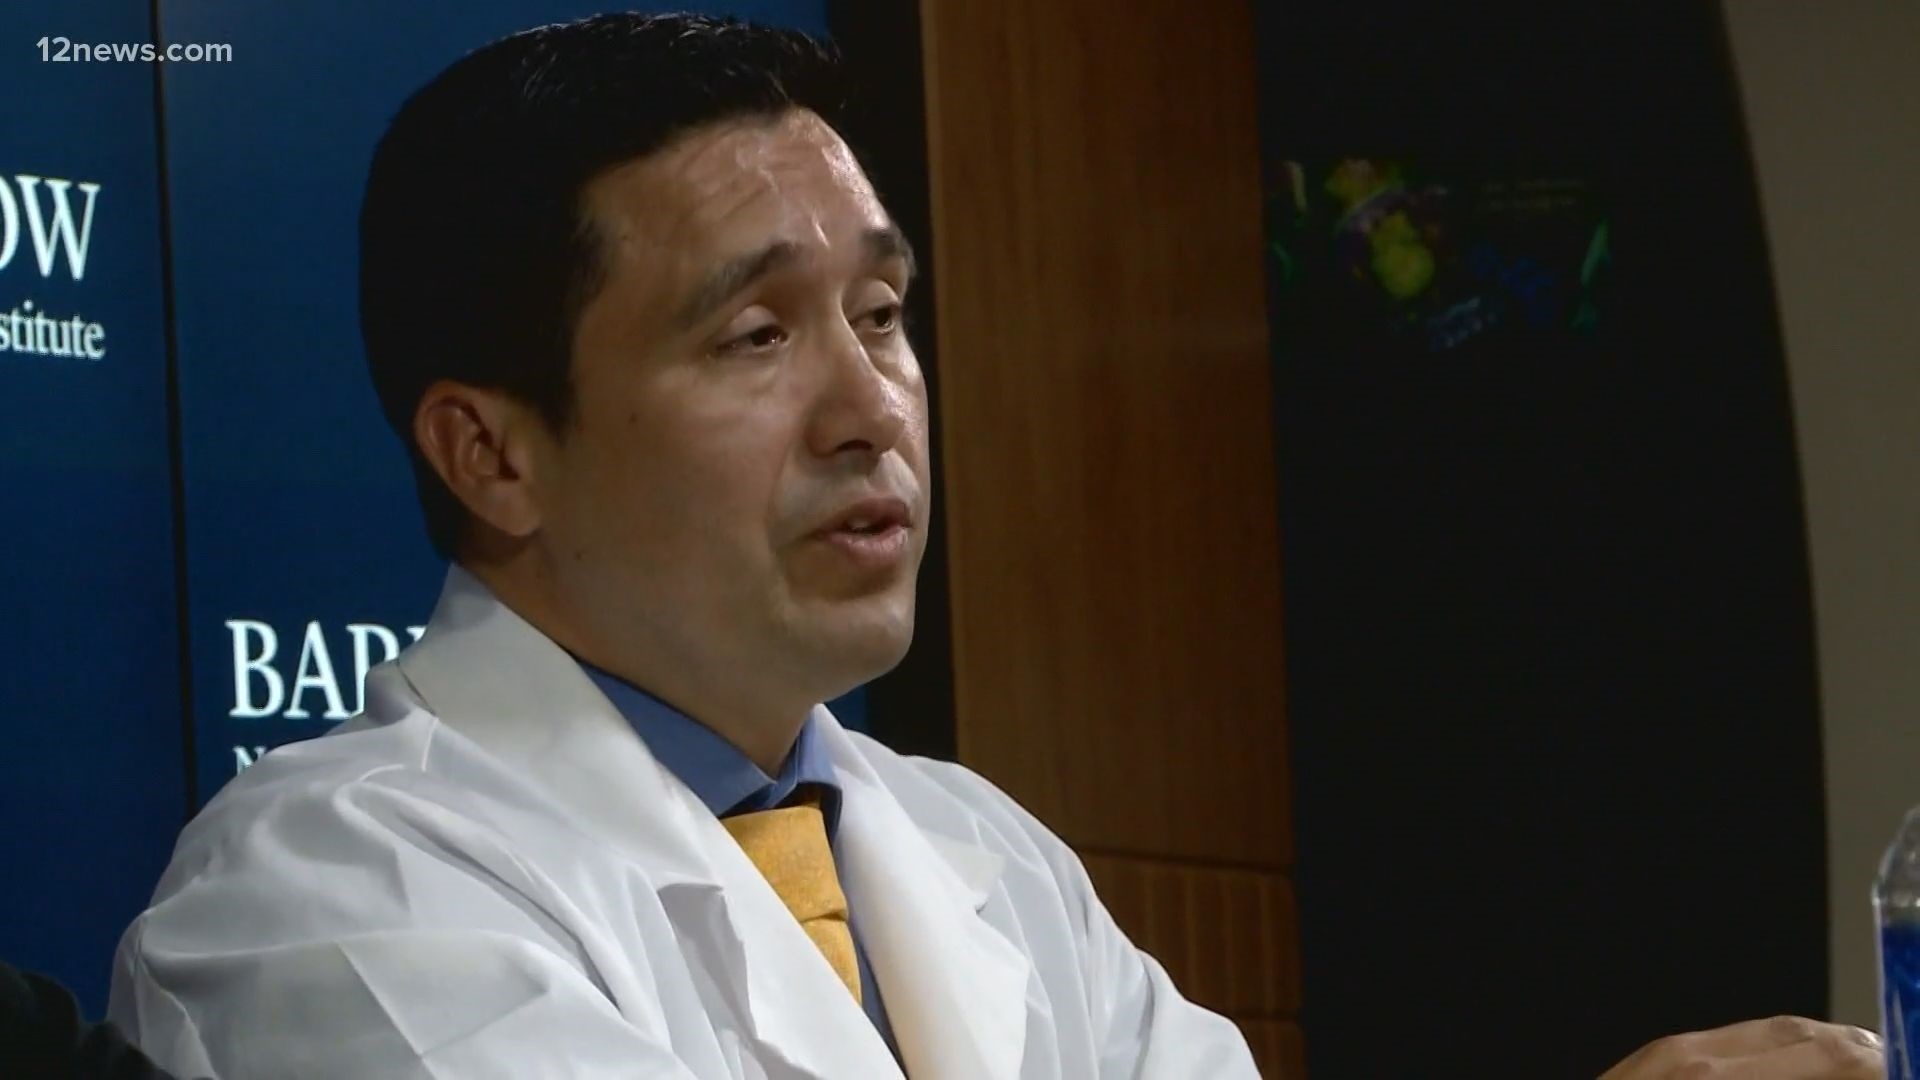 Dr. Javier Cardenas is a pioneer in the research of sports concussions. This Sunday, he'll be ready to remove professional football players from Super Bowl LV.